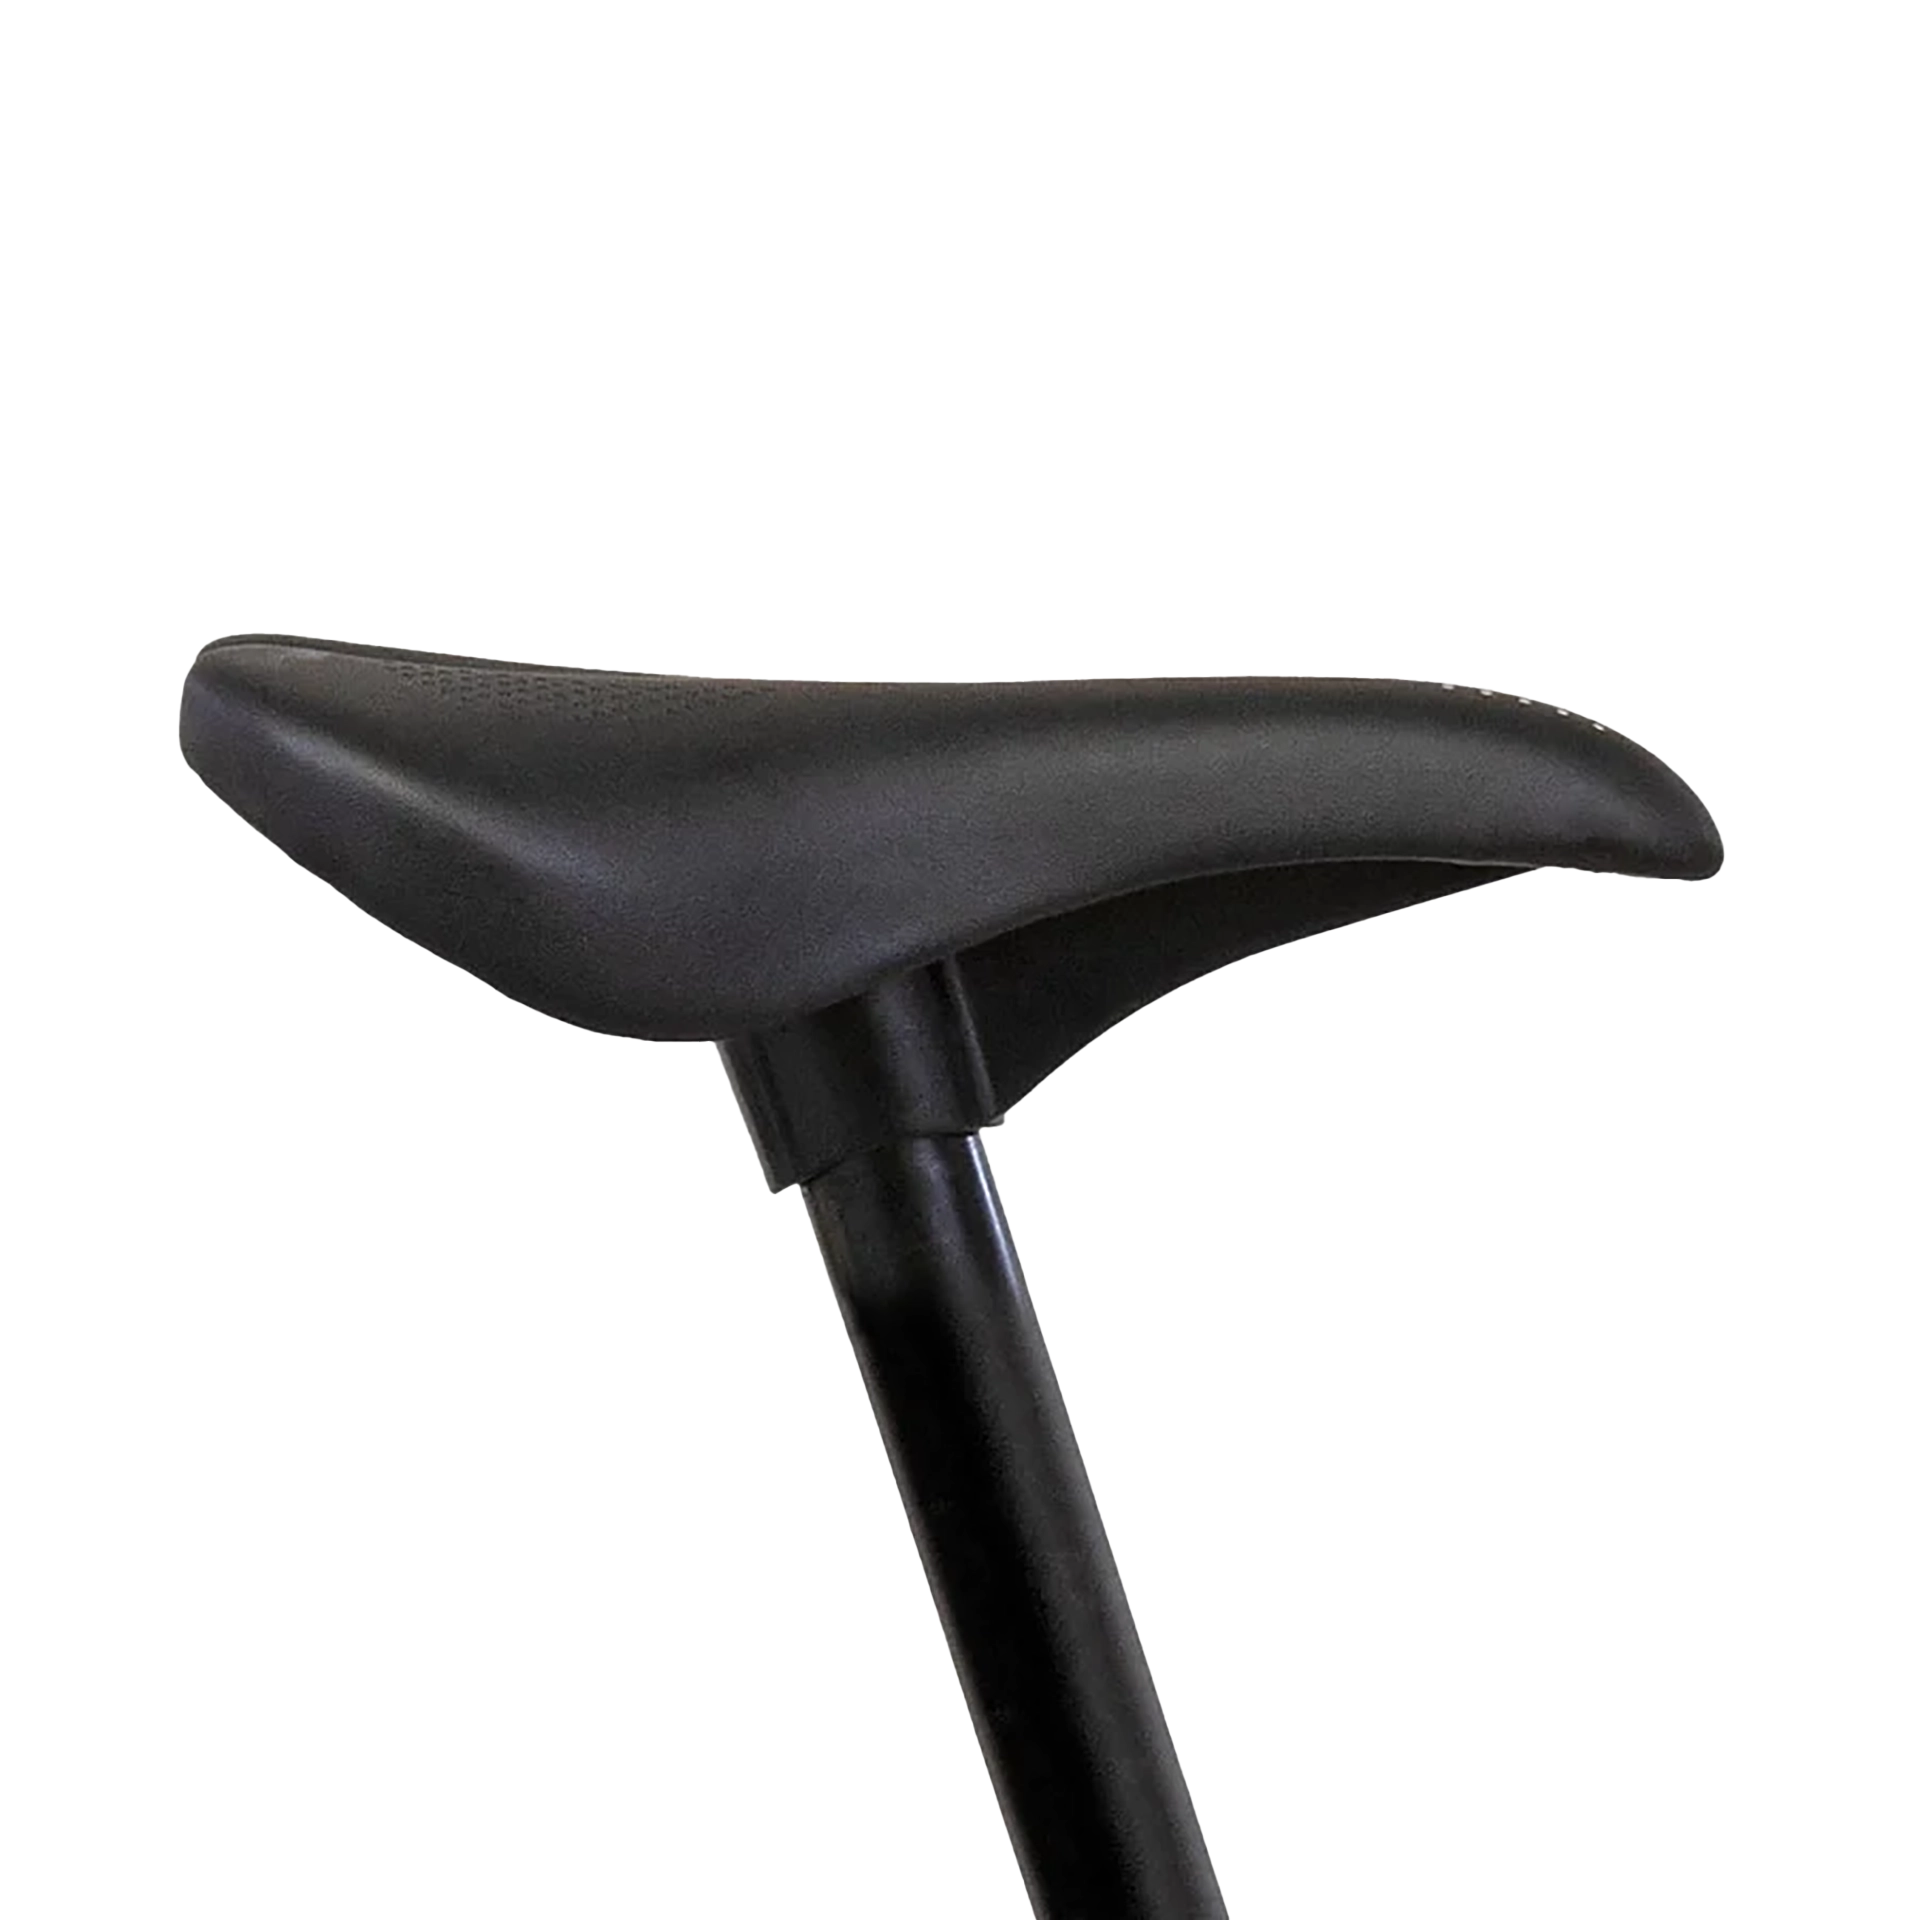 Saddle and seatpost, 25.4, 170mm, Cnoc 14 Small, Cnoc 14 (2023)